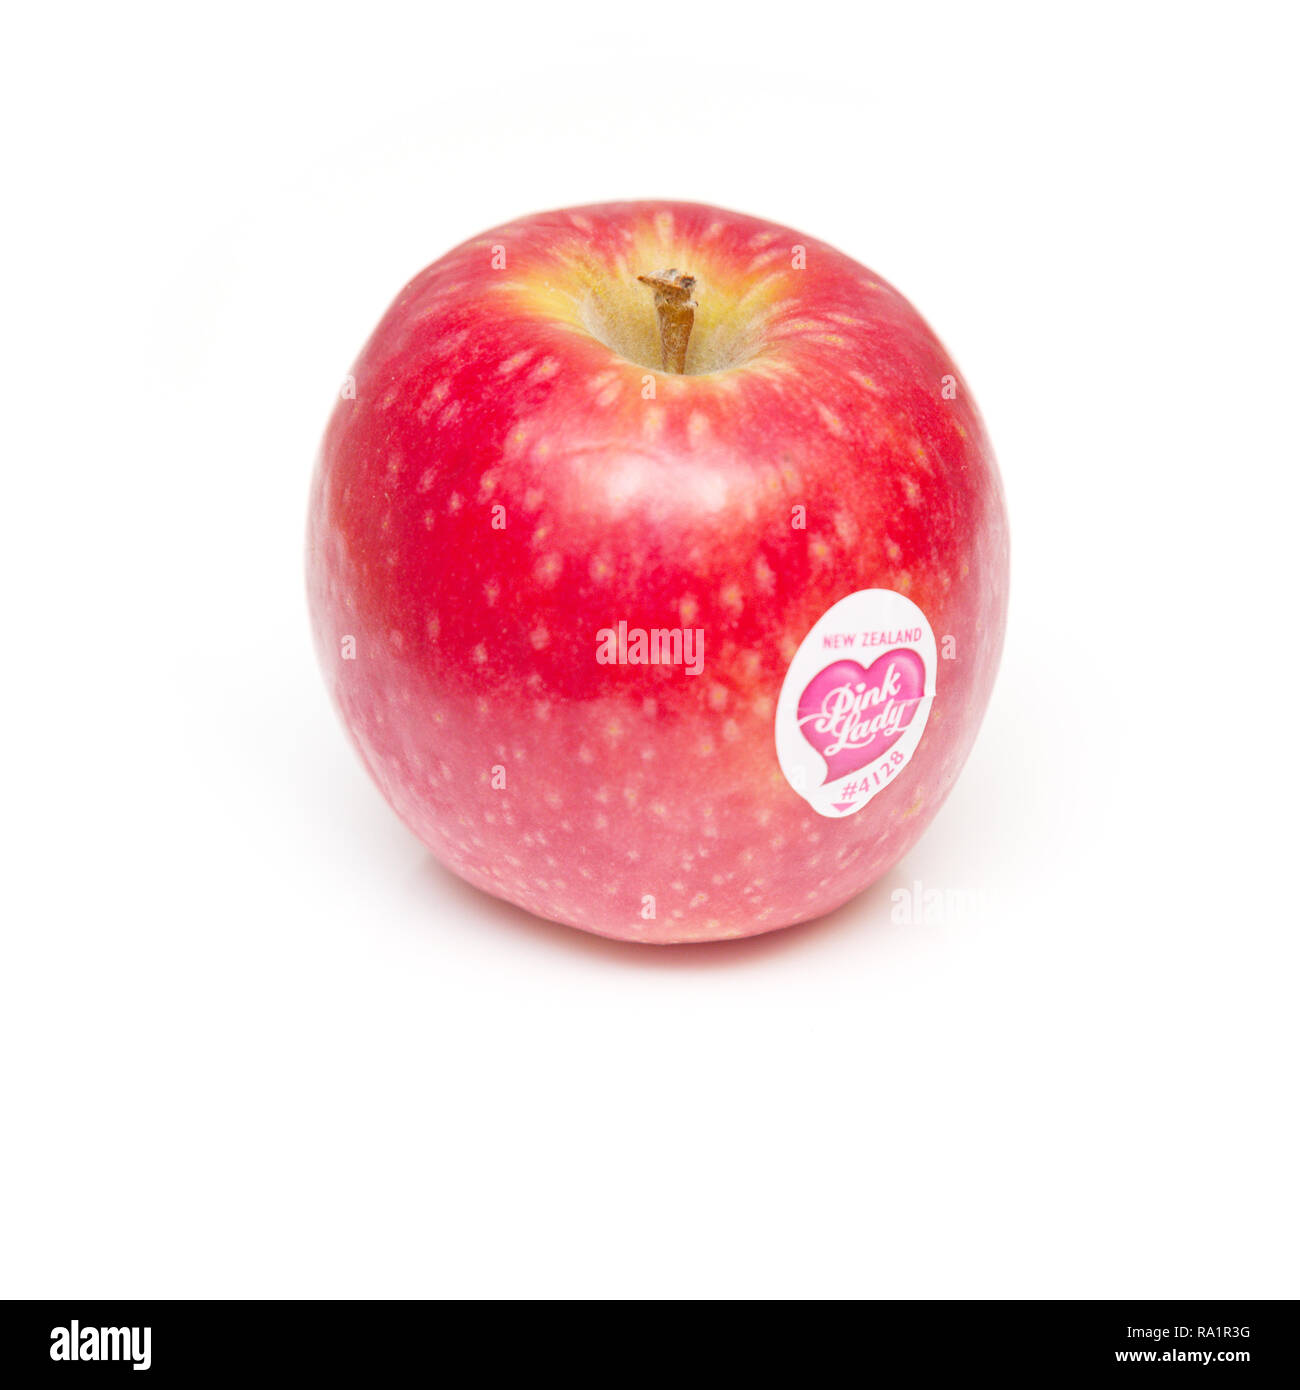 Pink Lady apple isolated on a white studio background. Stock Photo